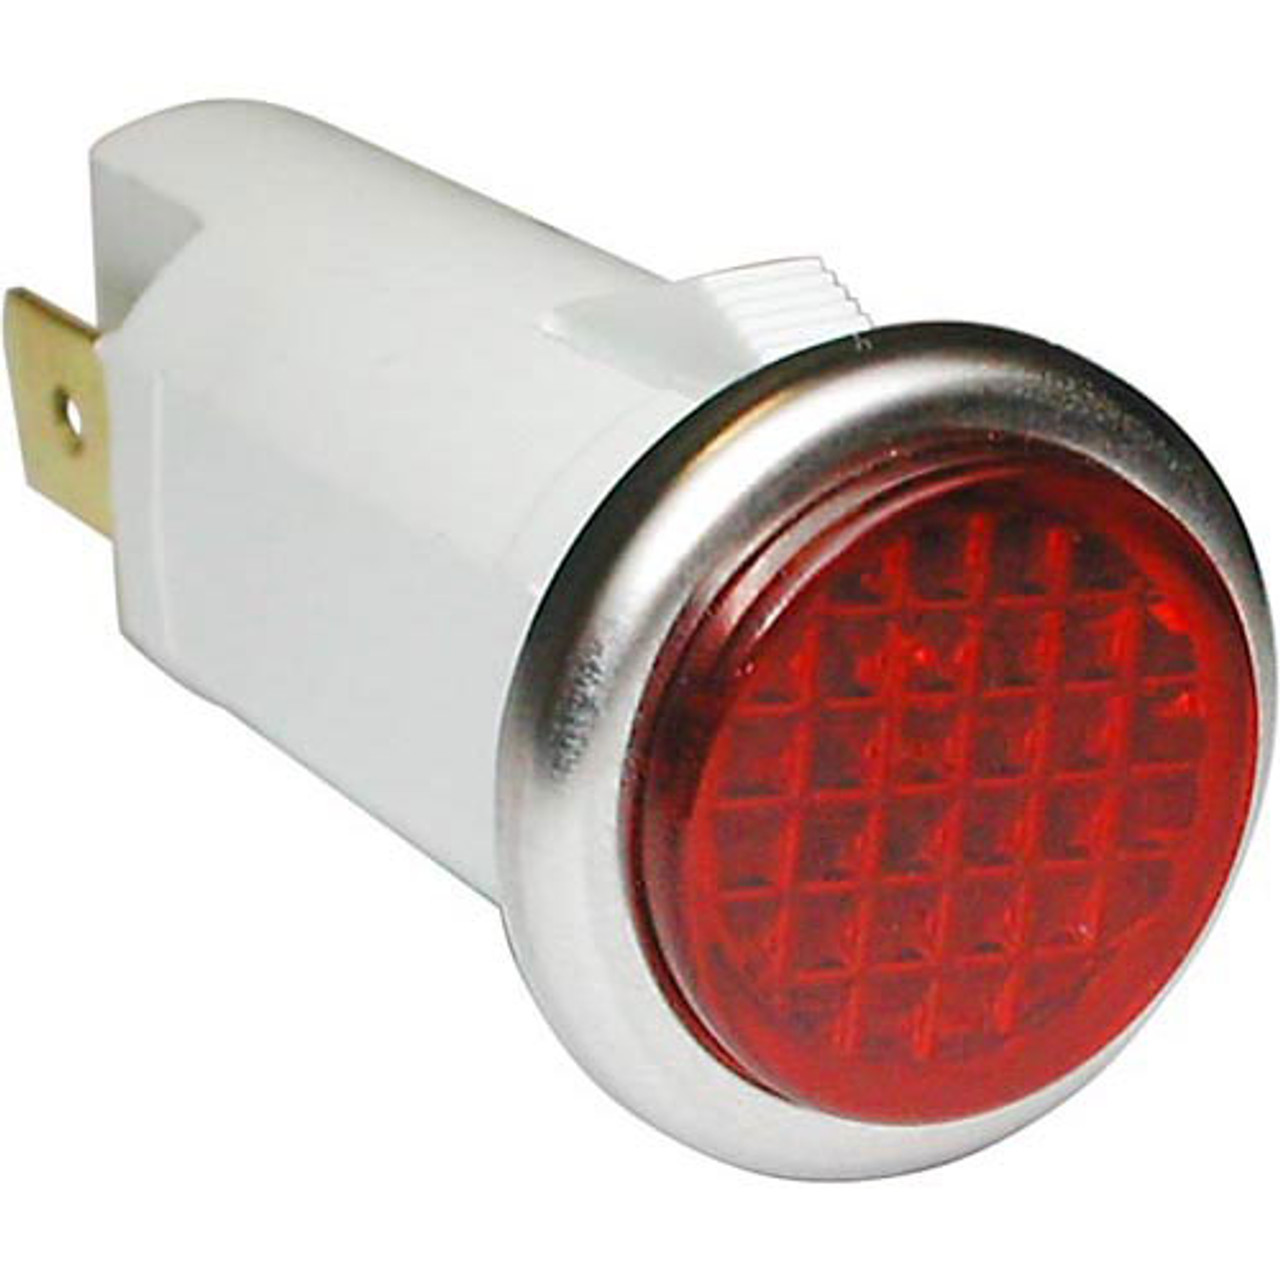 Signal Light 1/2" Red 250V - Replacement Part For Piper Products 705160